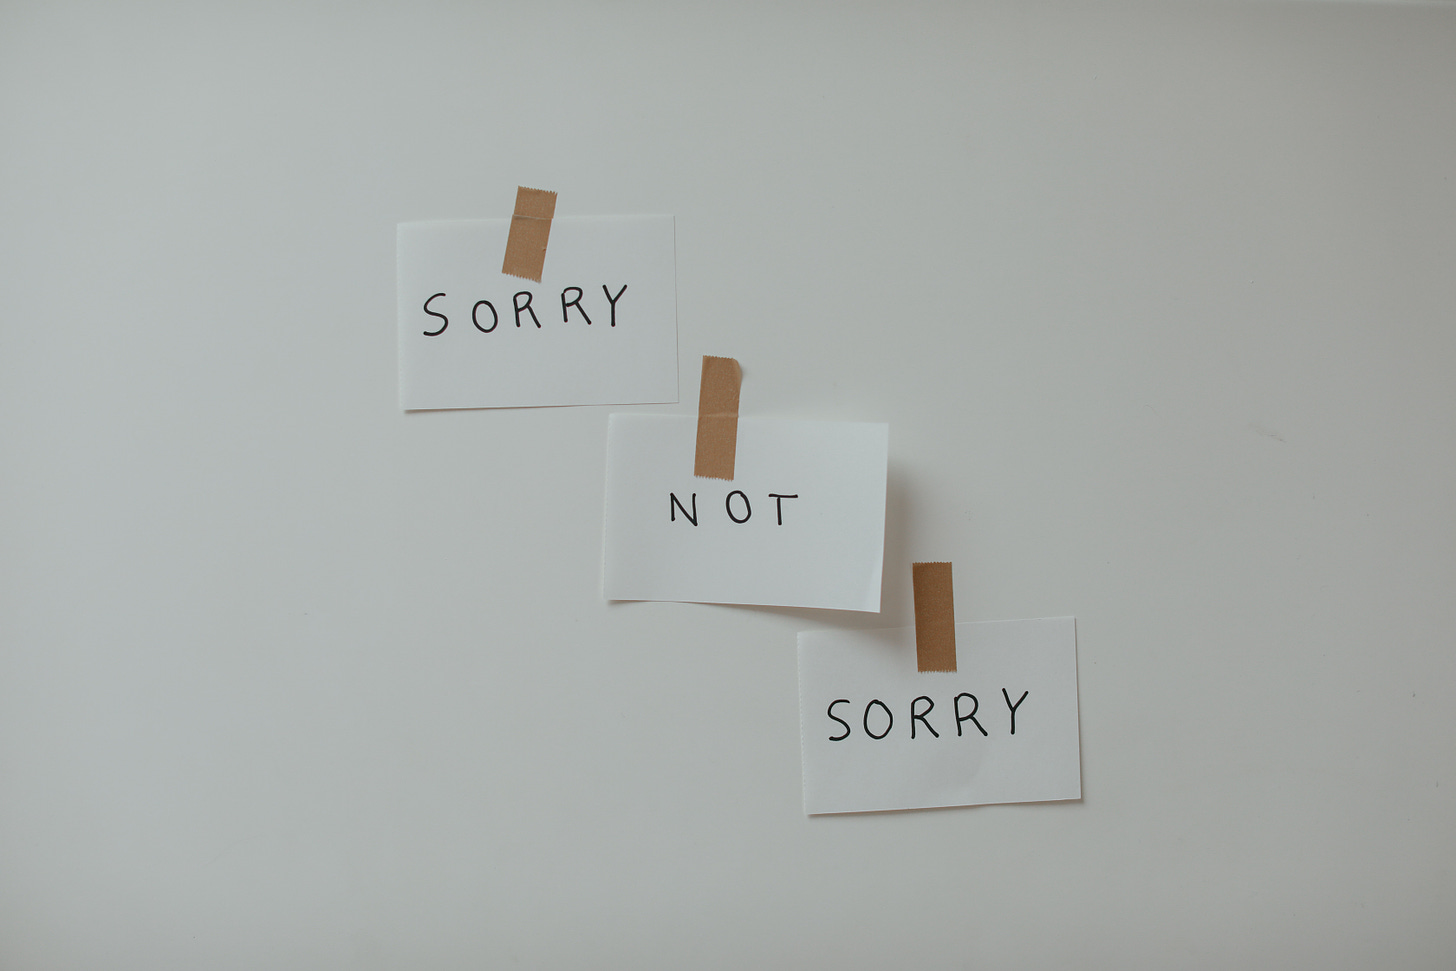 3 notes on a white wall that each say sorry, not, and sorry on them